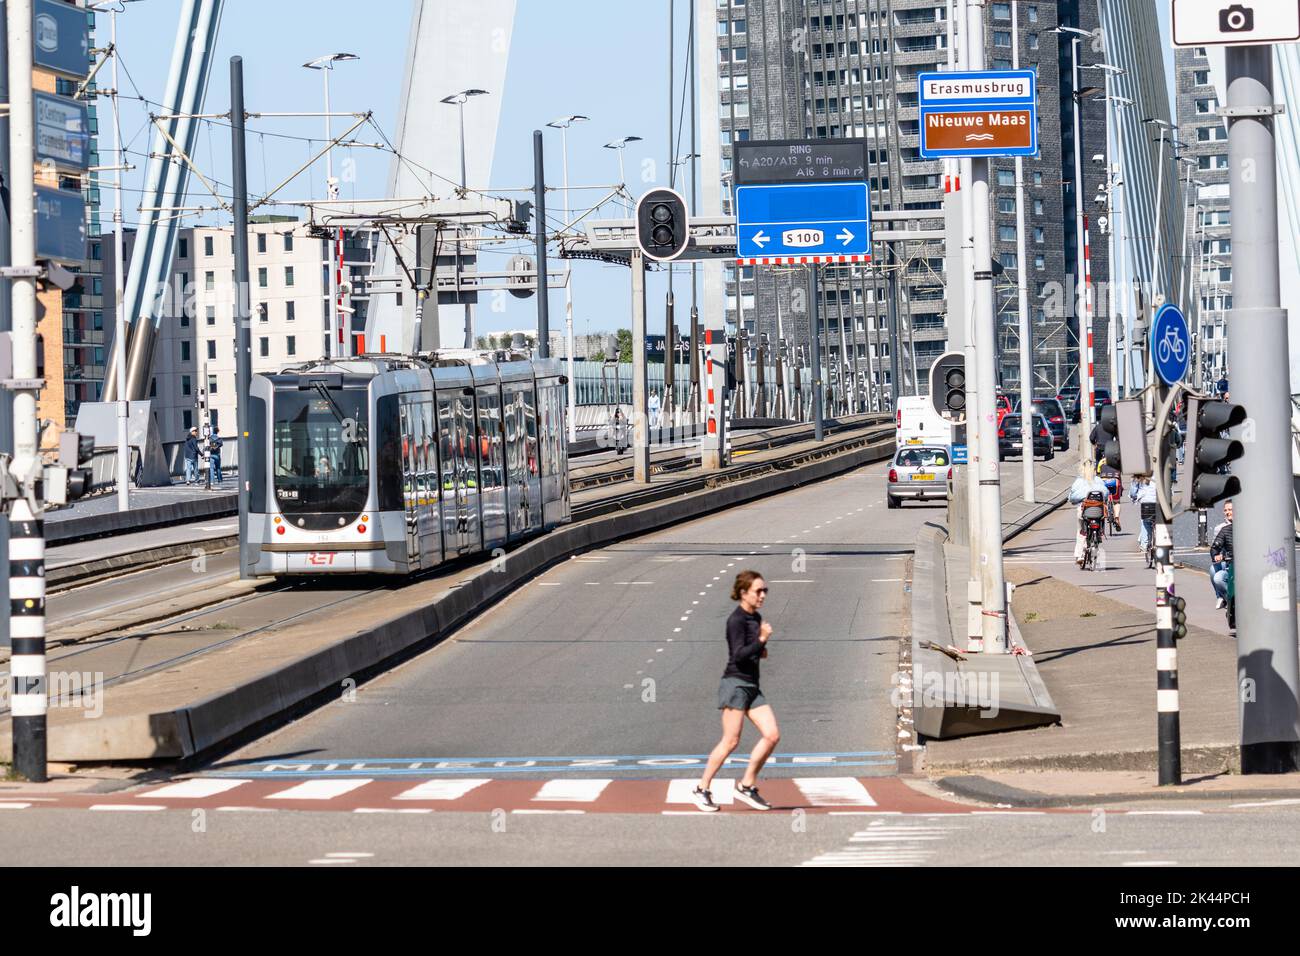 Rotterdam, Netherlands - May 8, 2022: People crossing and vehicles driving on the Erasmusbrug bridge over New Meuse river. Sunny day of spring Stock Photo